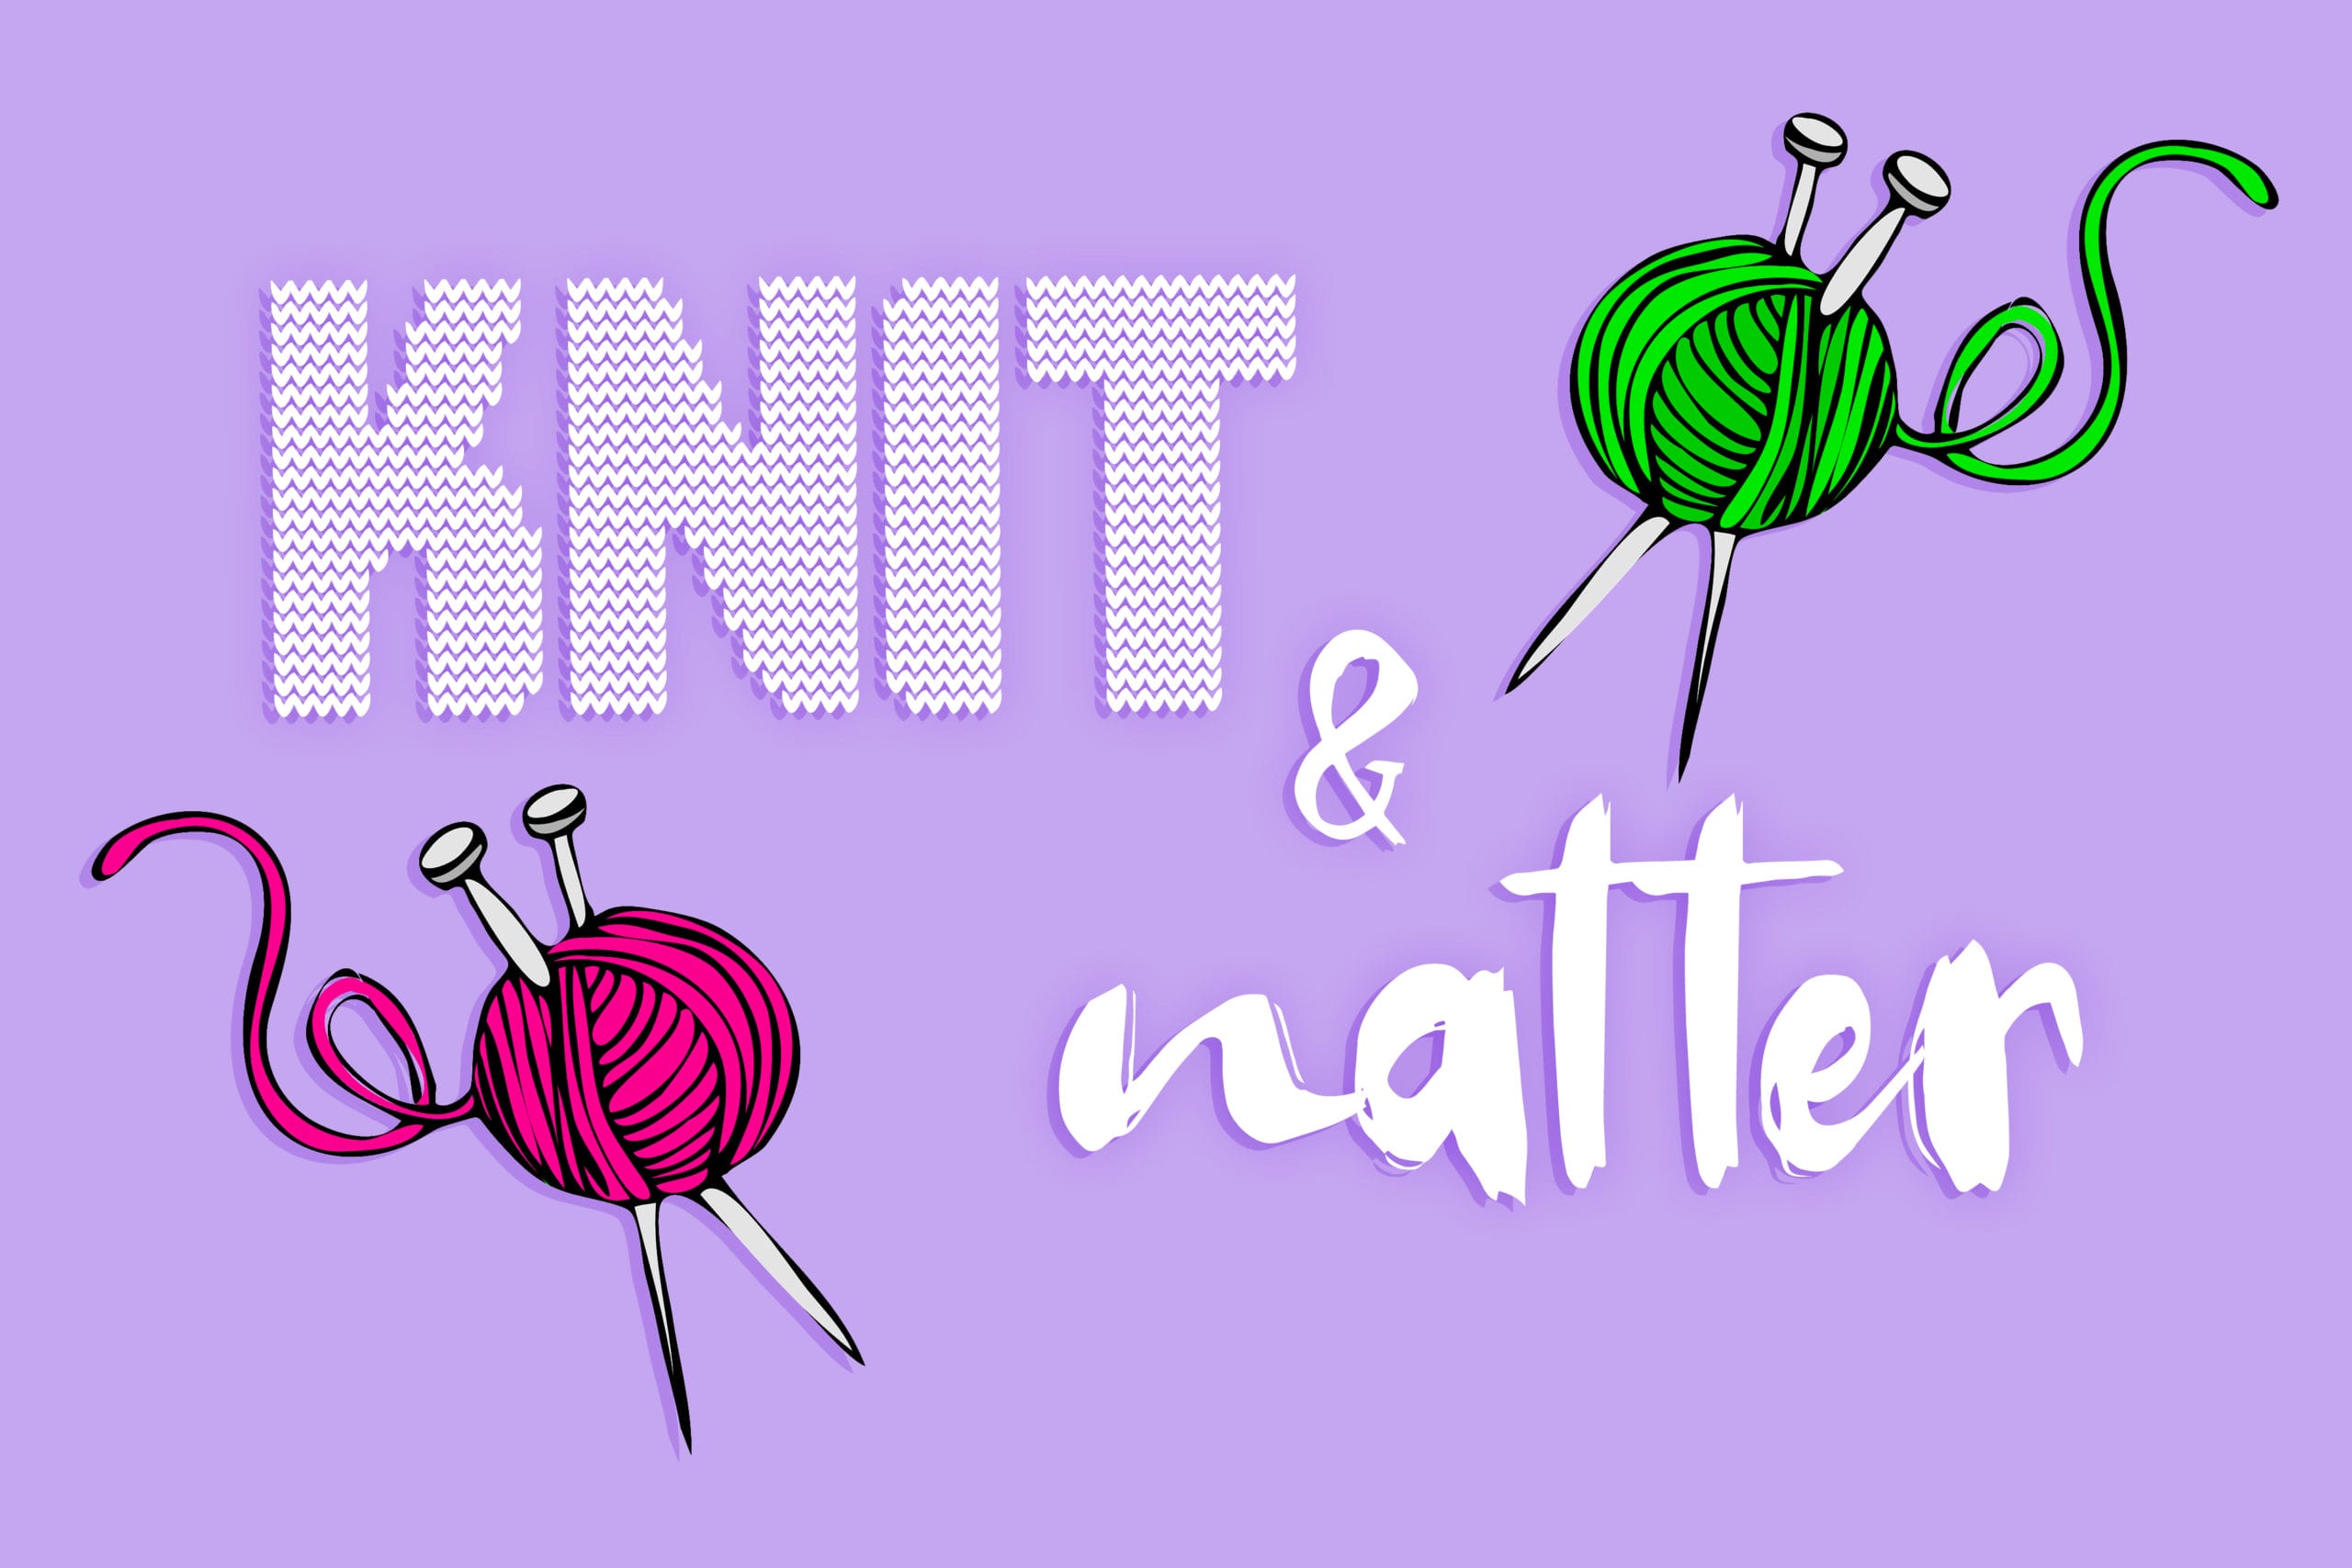 Cartoon illustrated knitting needles and pink and green balls of wool. Dynamic block text reads 